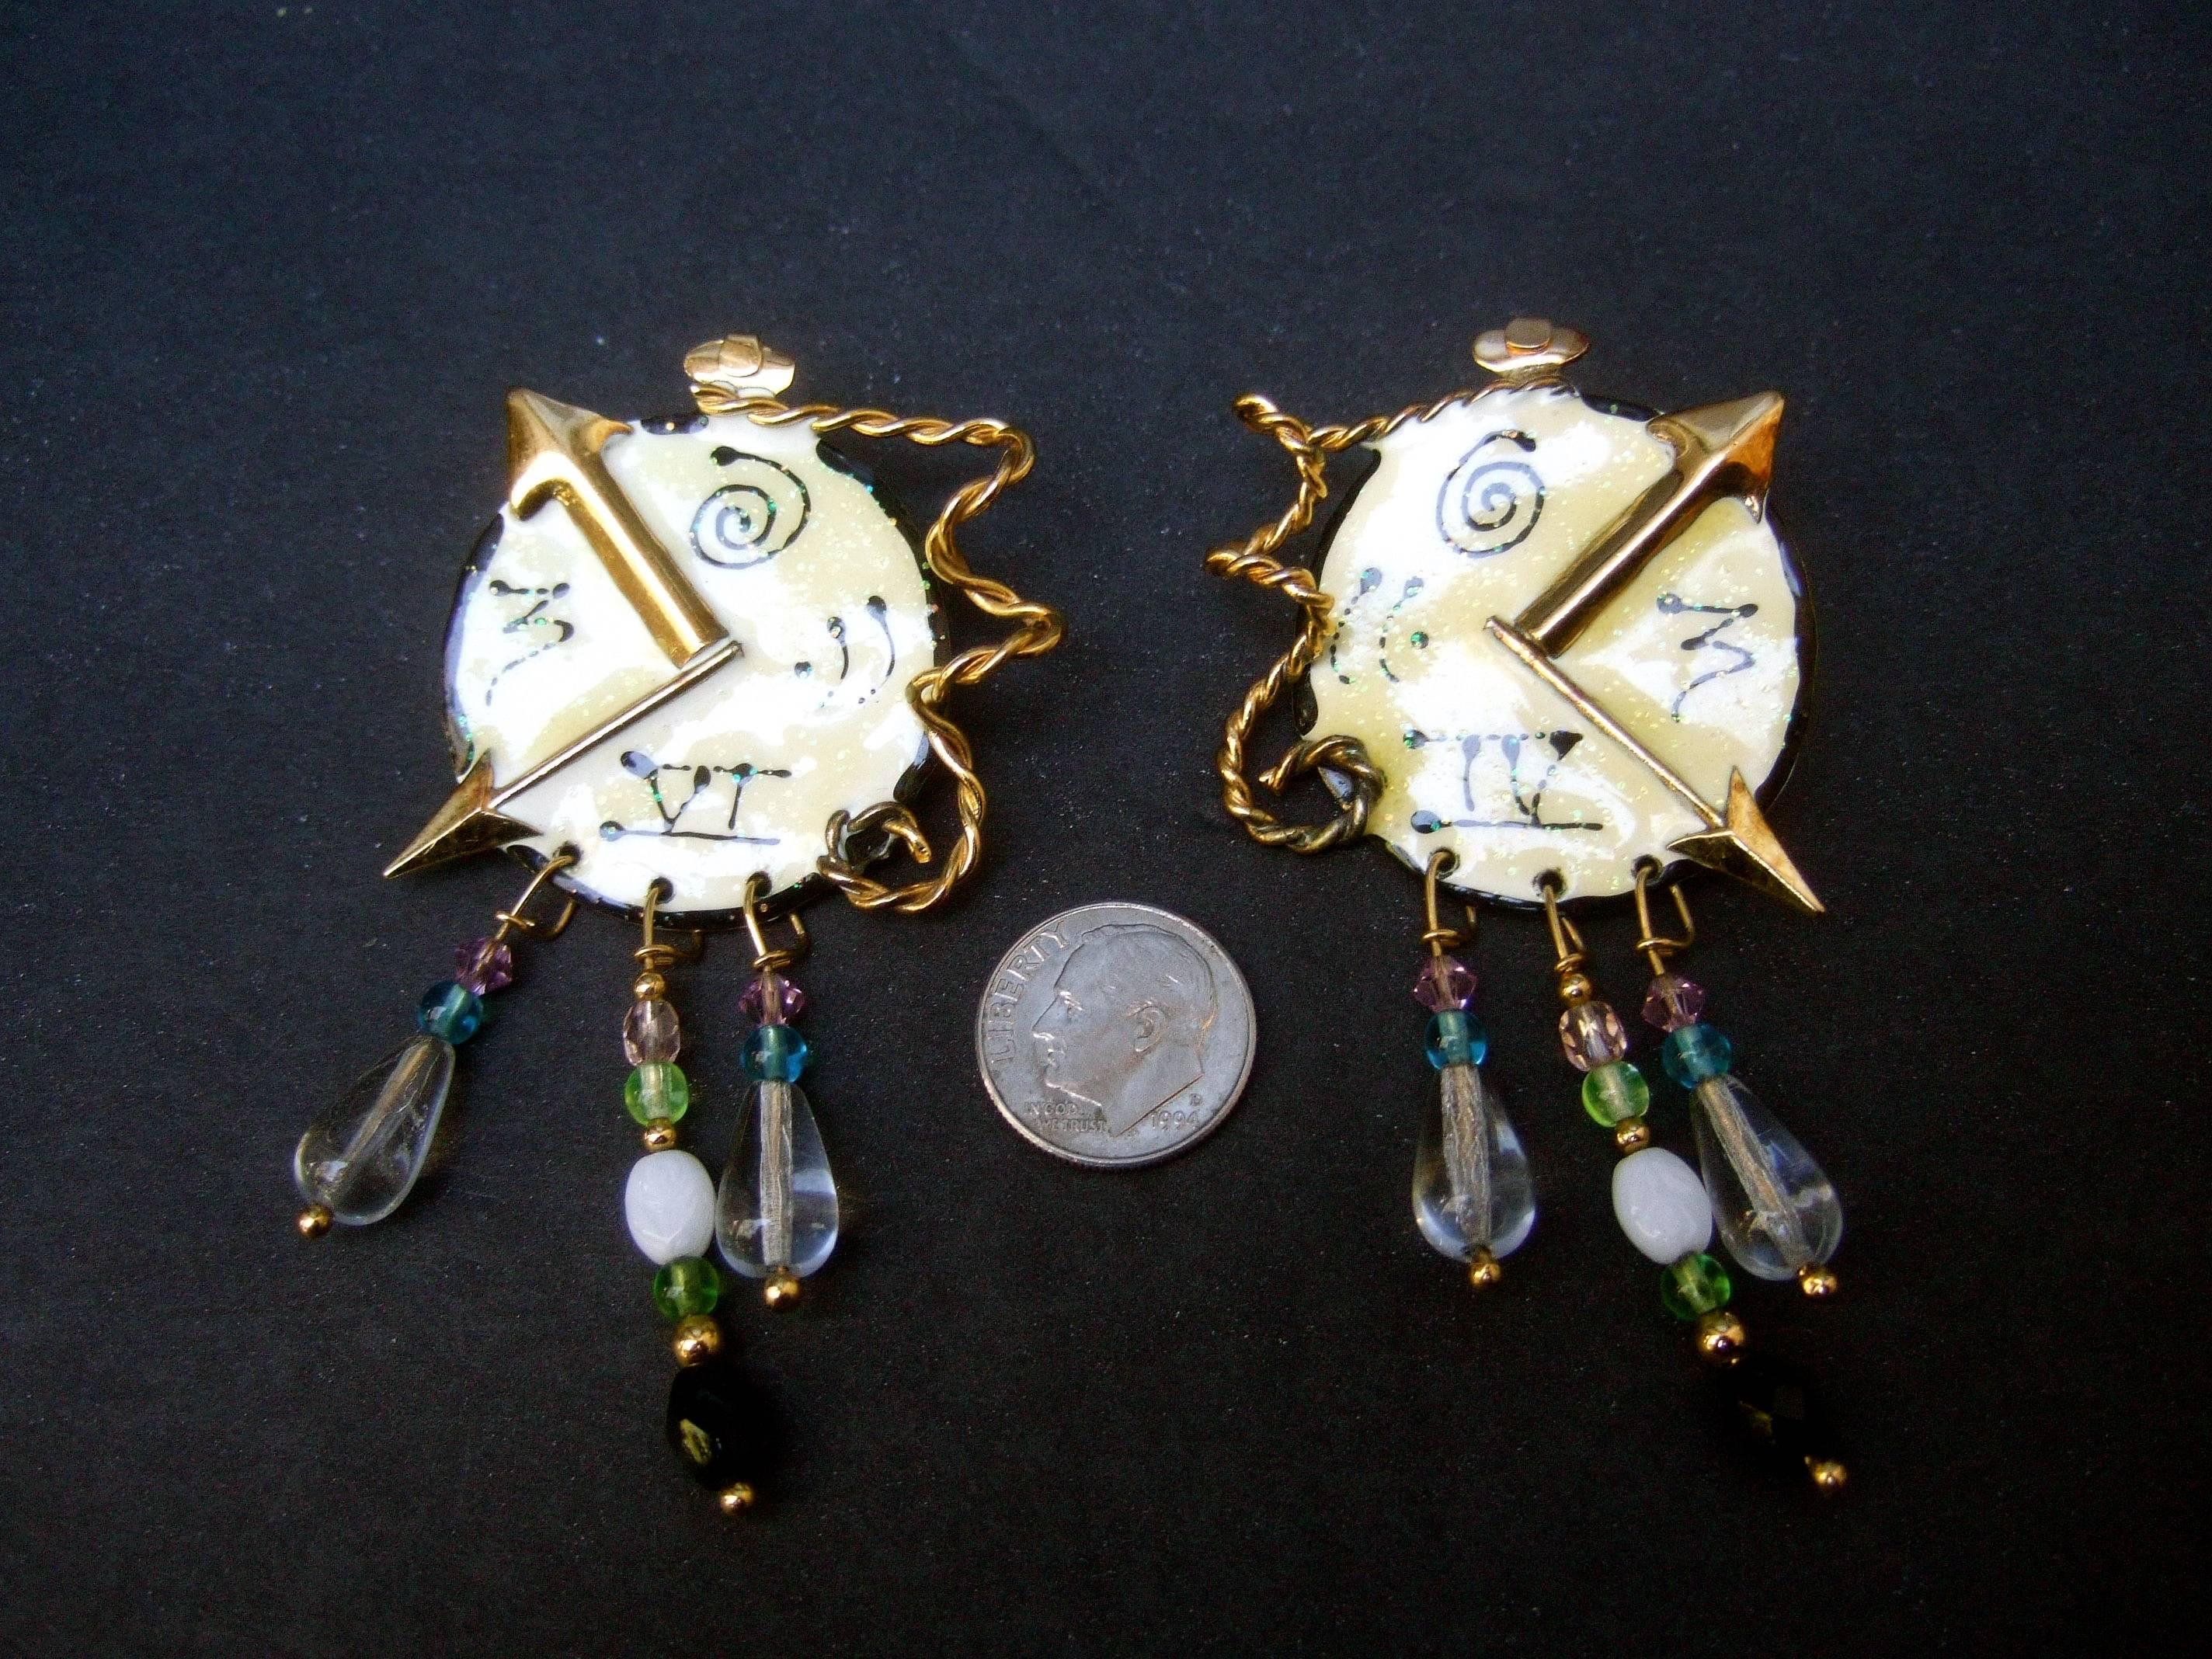 Lunch at the Ritz Whimsical Enamel Clock Artisan Earrings circa 1980s   For Sale 3